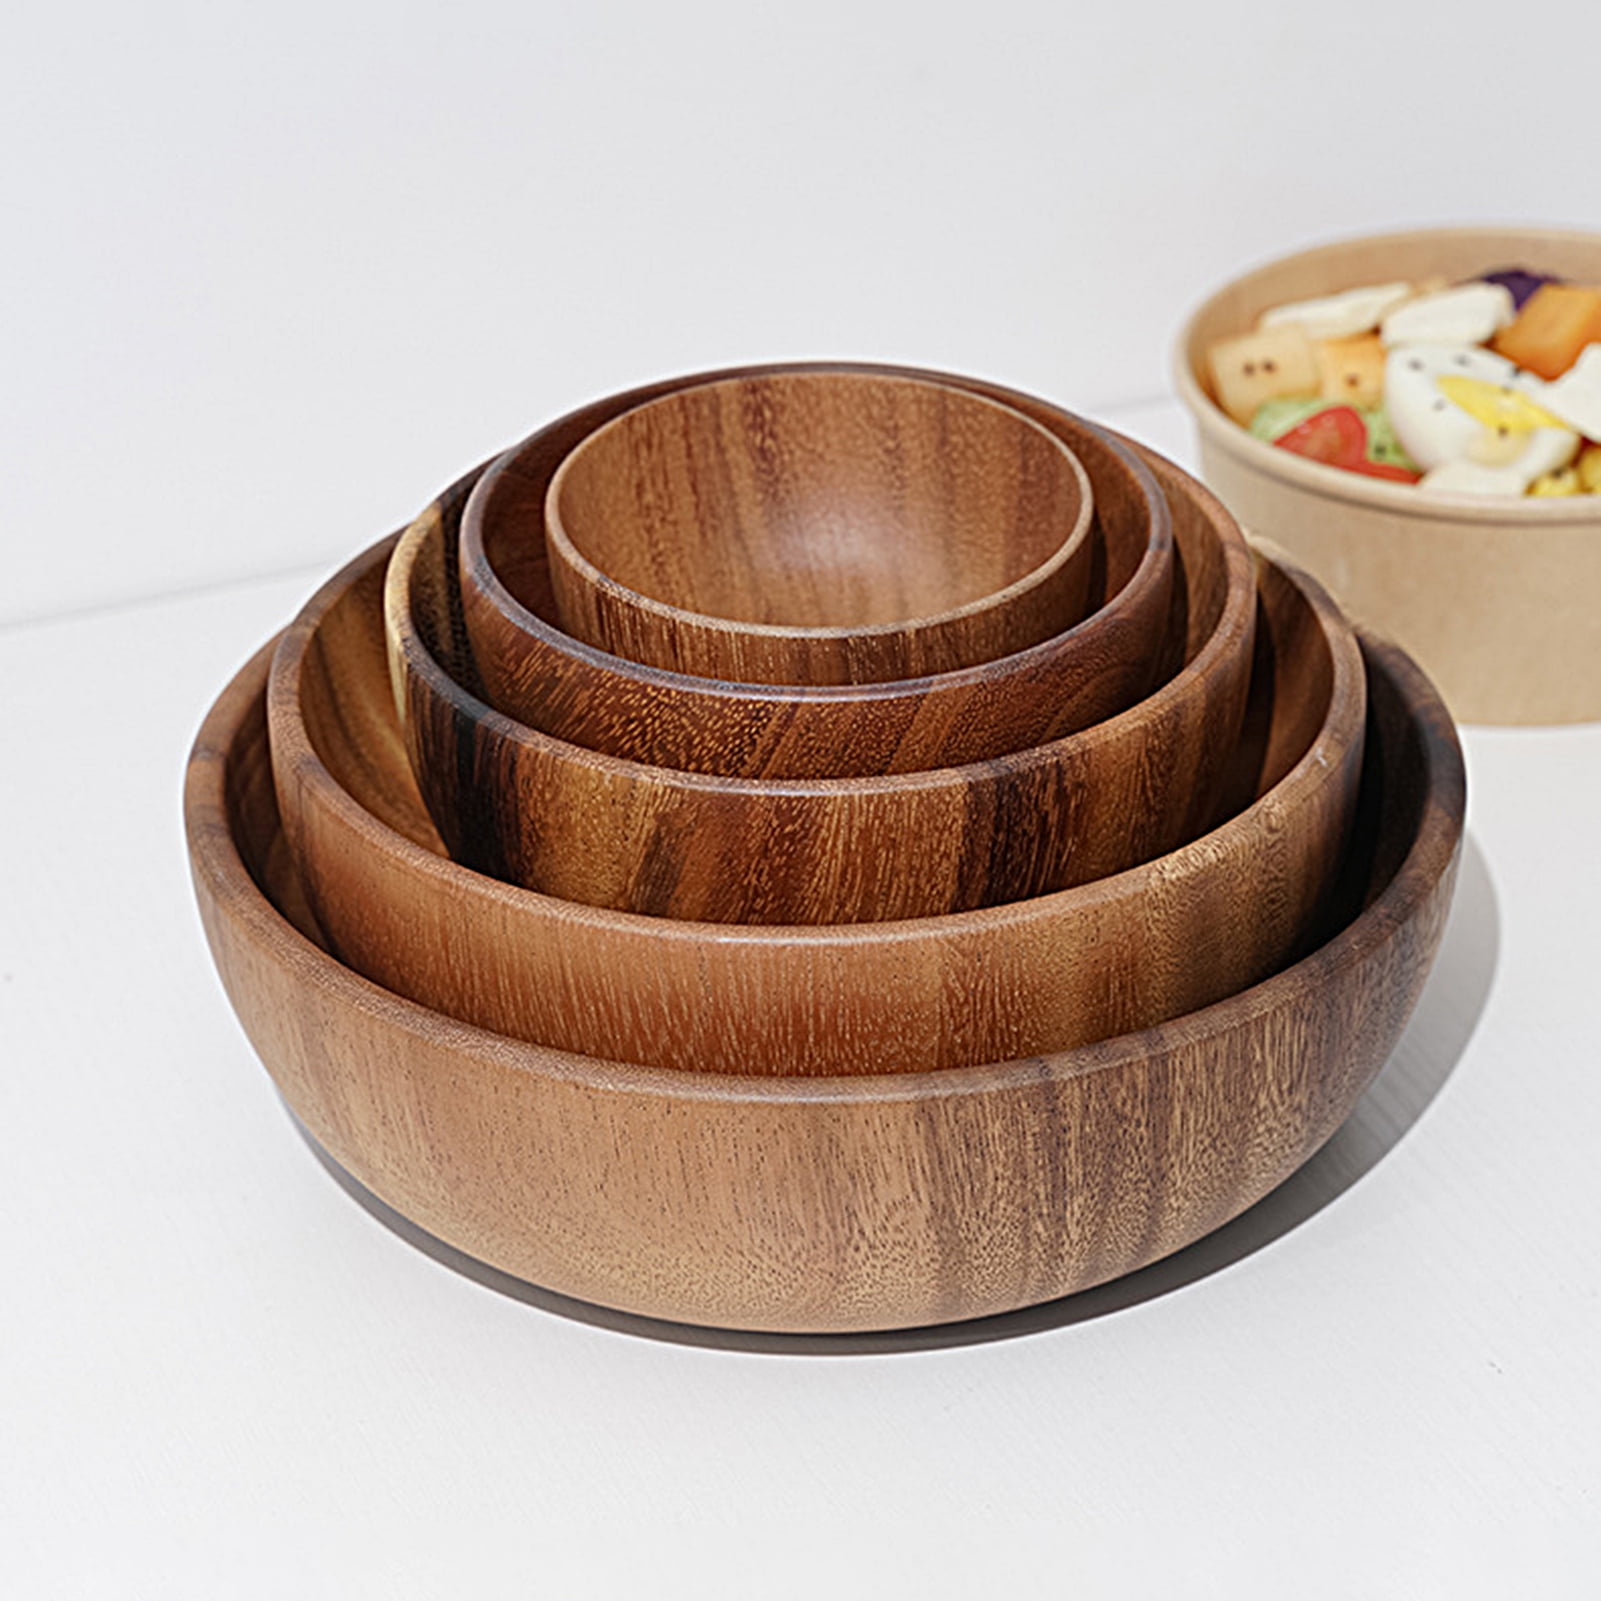 BJ's Wholesale's Large Acacia Wood Serving Bowl Set Is Selling Fast - Parade